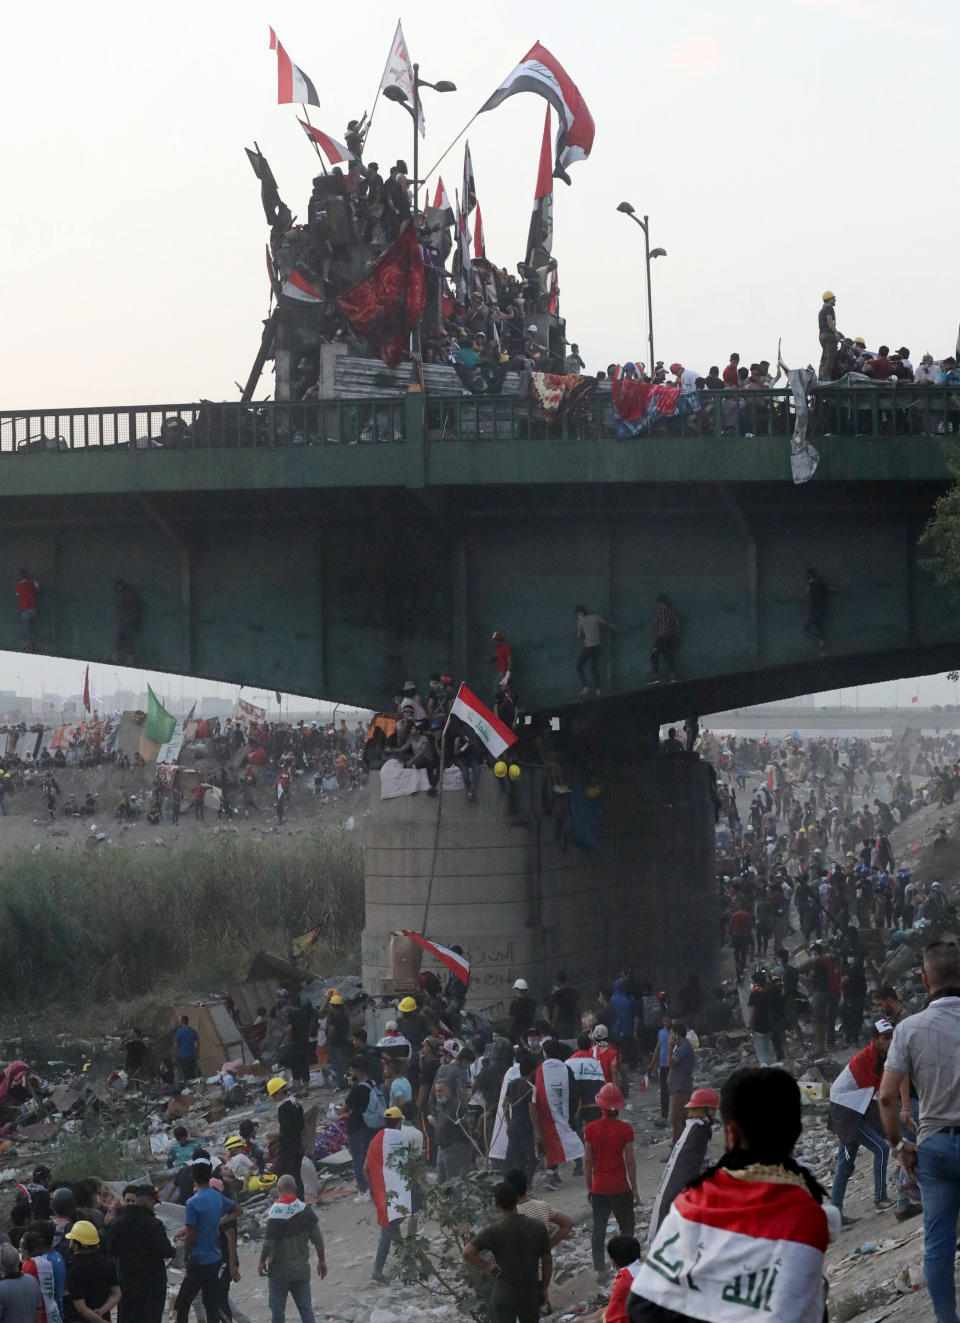 Anti-government protesters stand on barriers set by Iraqi security forces and gather around the Joumhouriya bridge leading to the Green Zone government areas during ongoing protests in Baghdad, Iraq, Sunday, Nov. 3, 2019. (AP Photo/Khalid Mohammed)